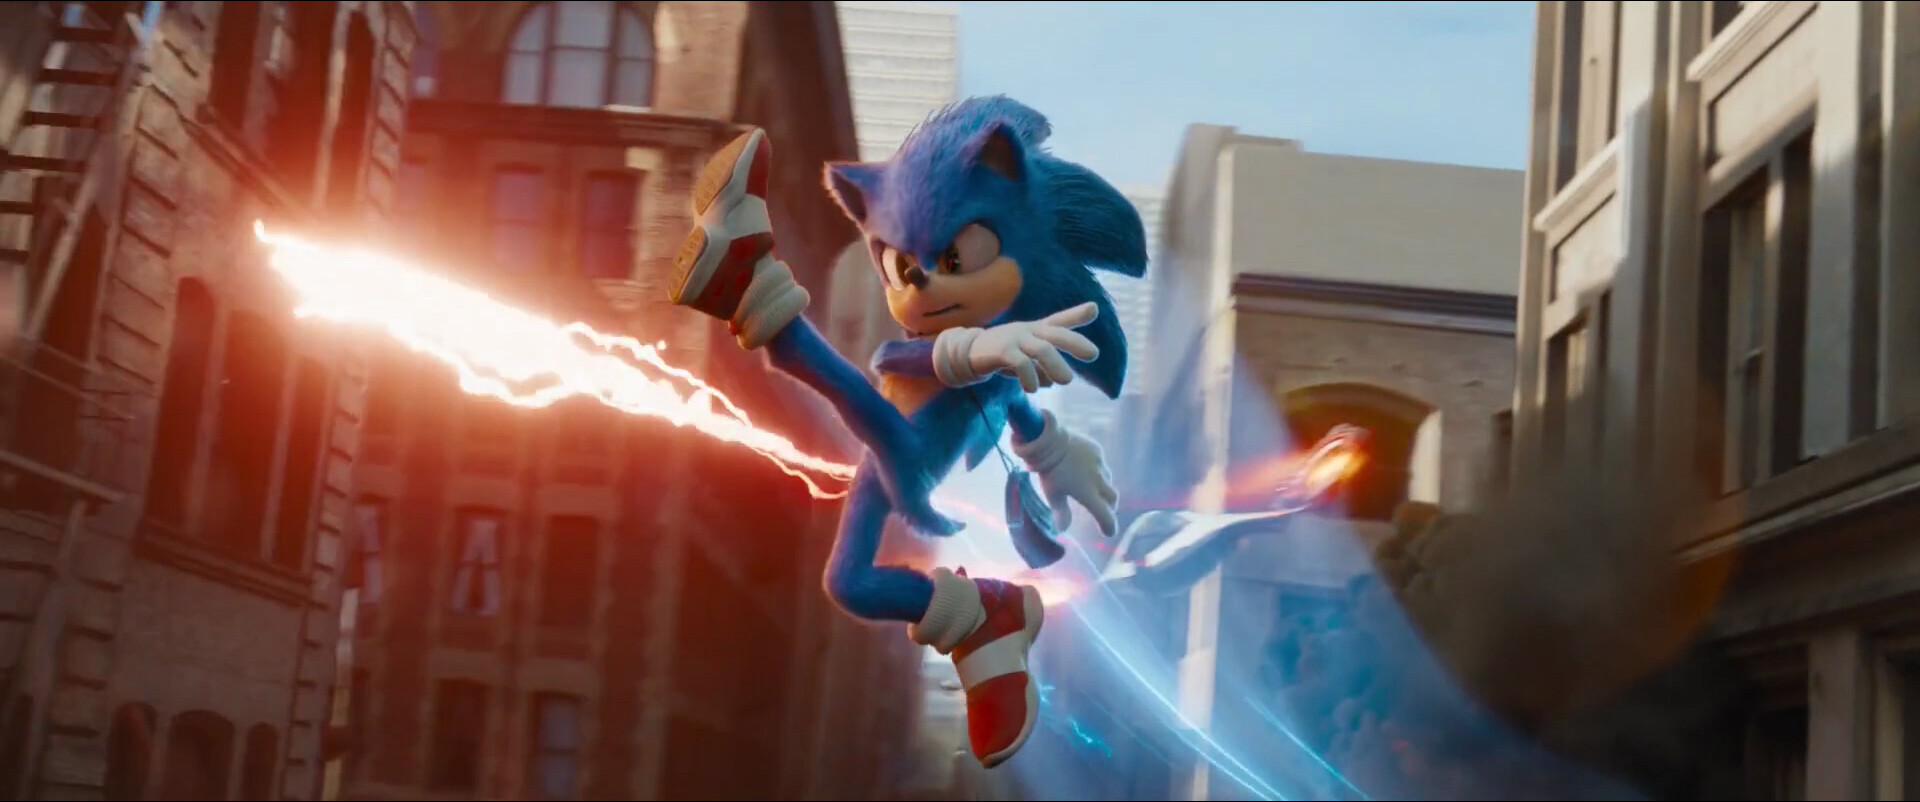 QuickView: Sonic the Hedgehog (2020)